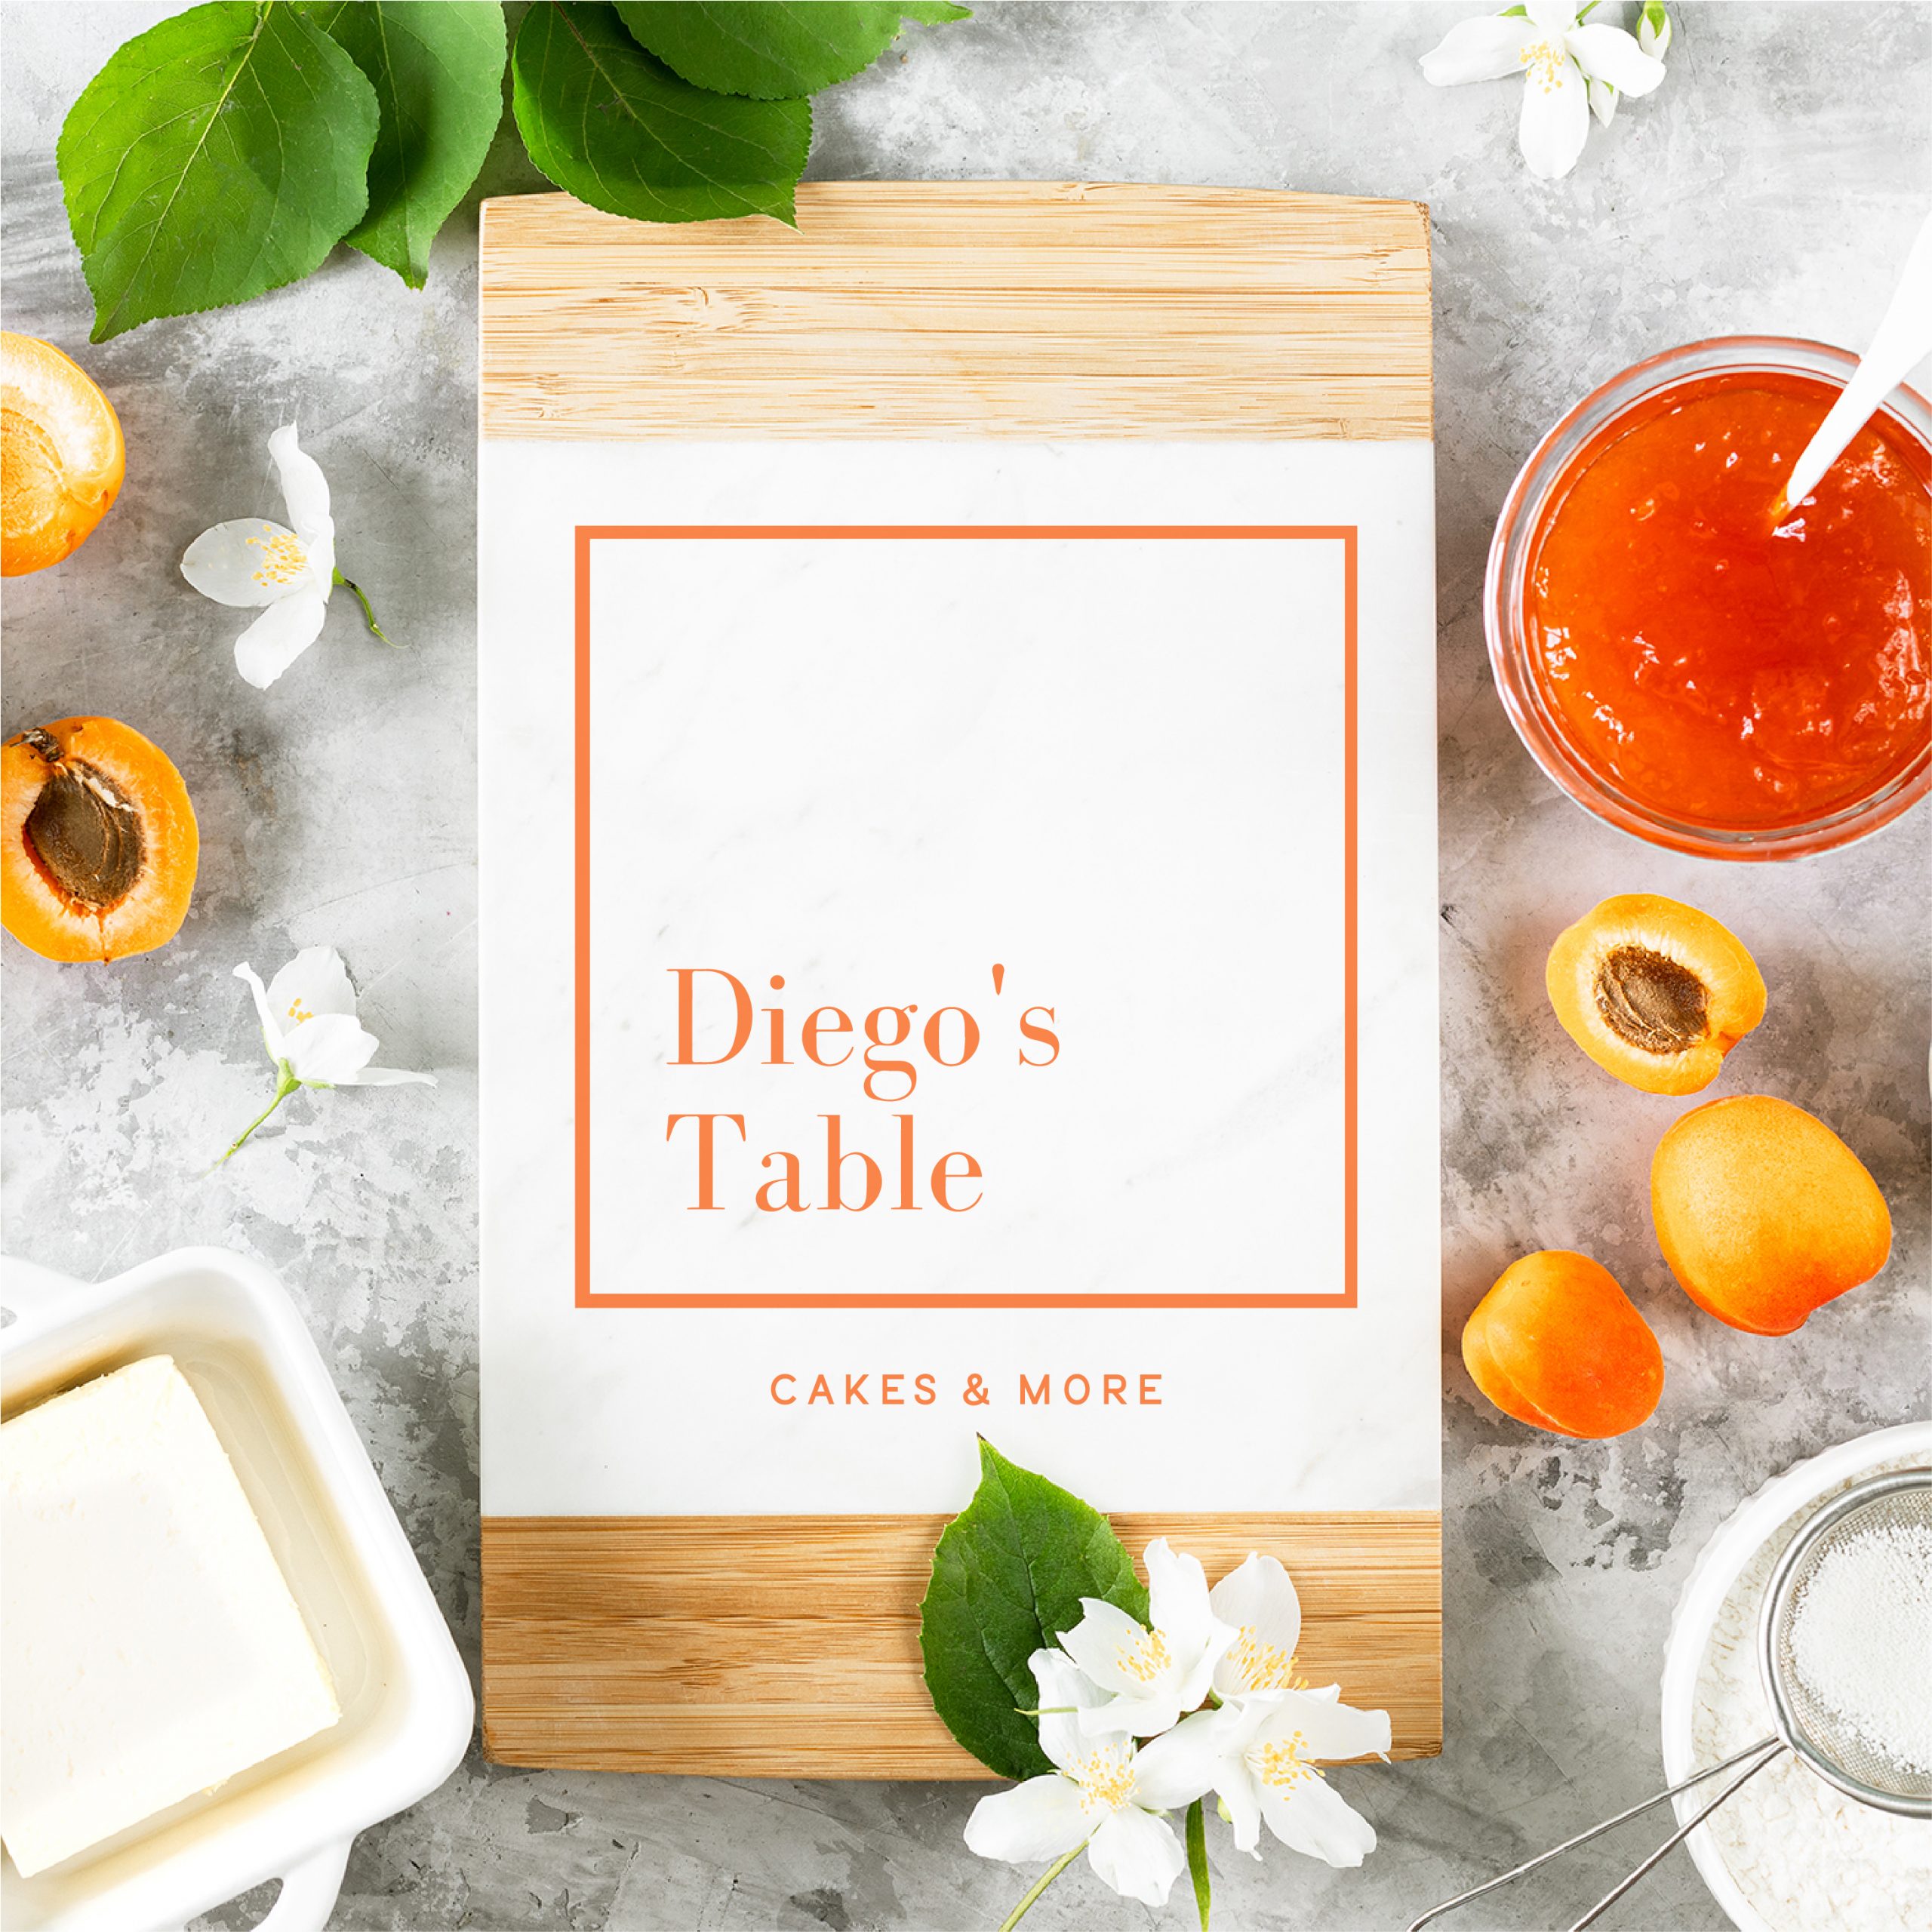 Diegos table